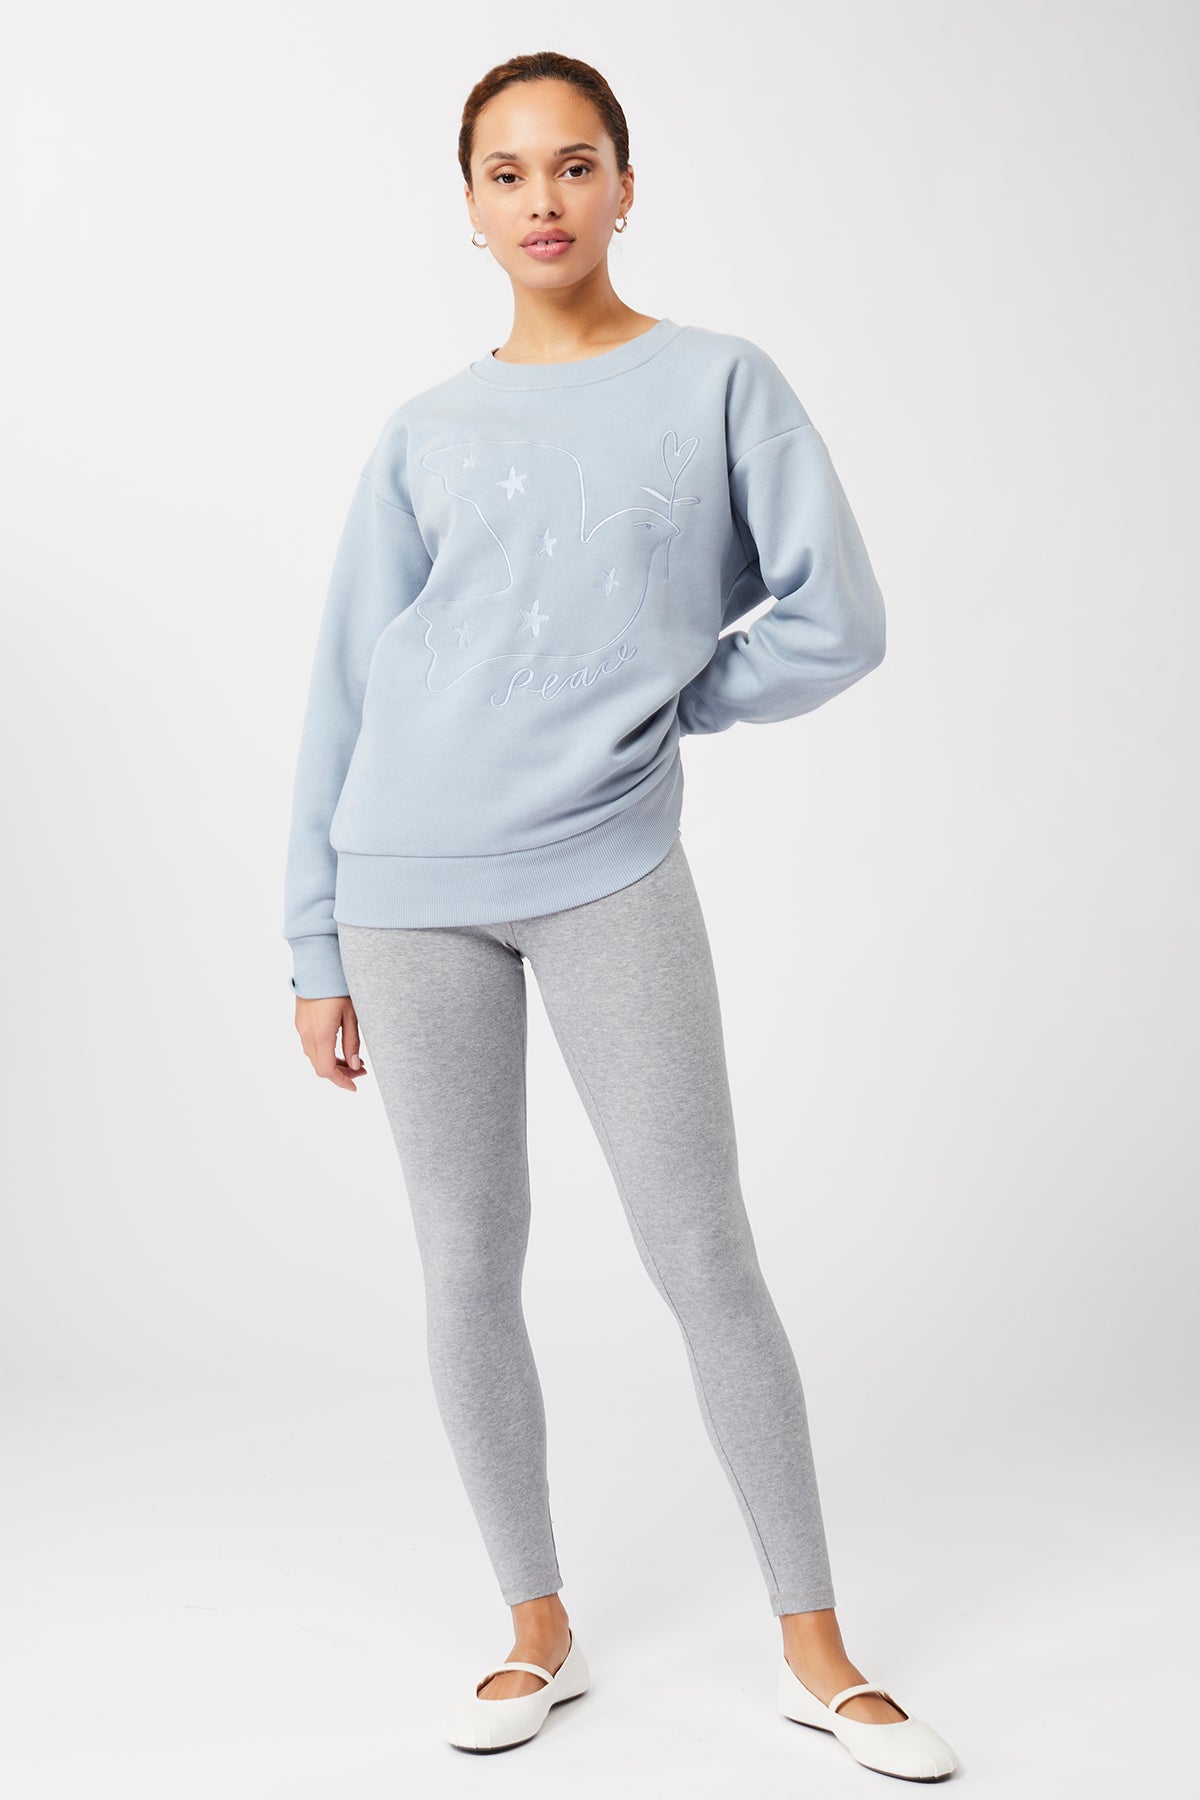 Mandala Yoga Pullover Graublau Outfit Front - Peace Sweater